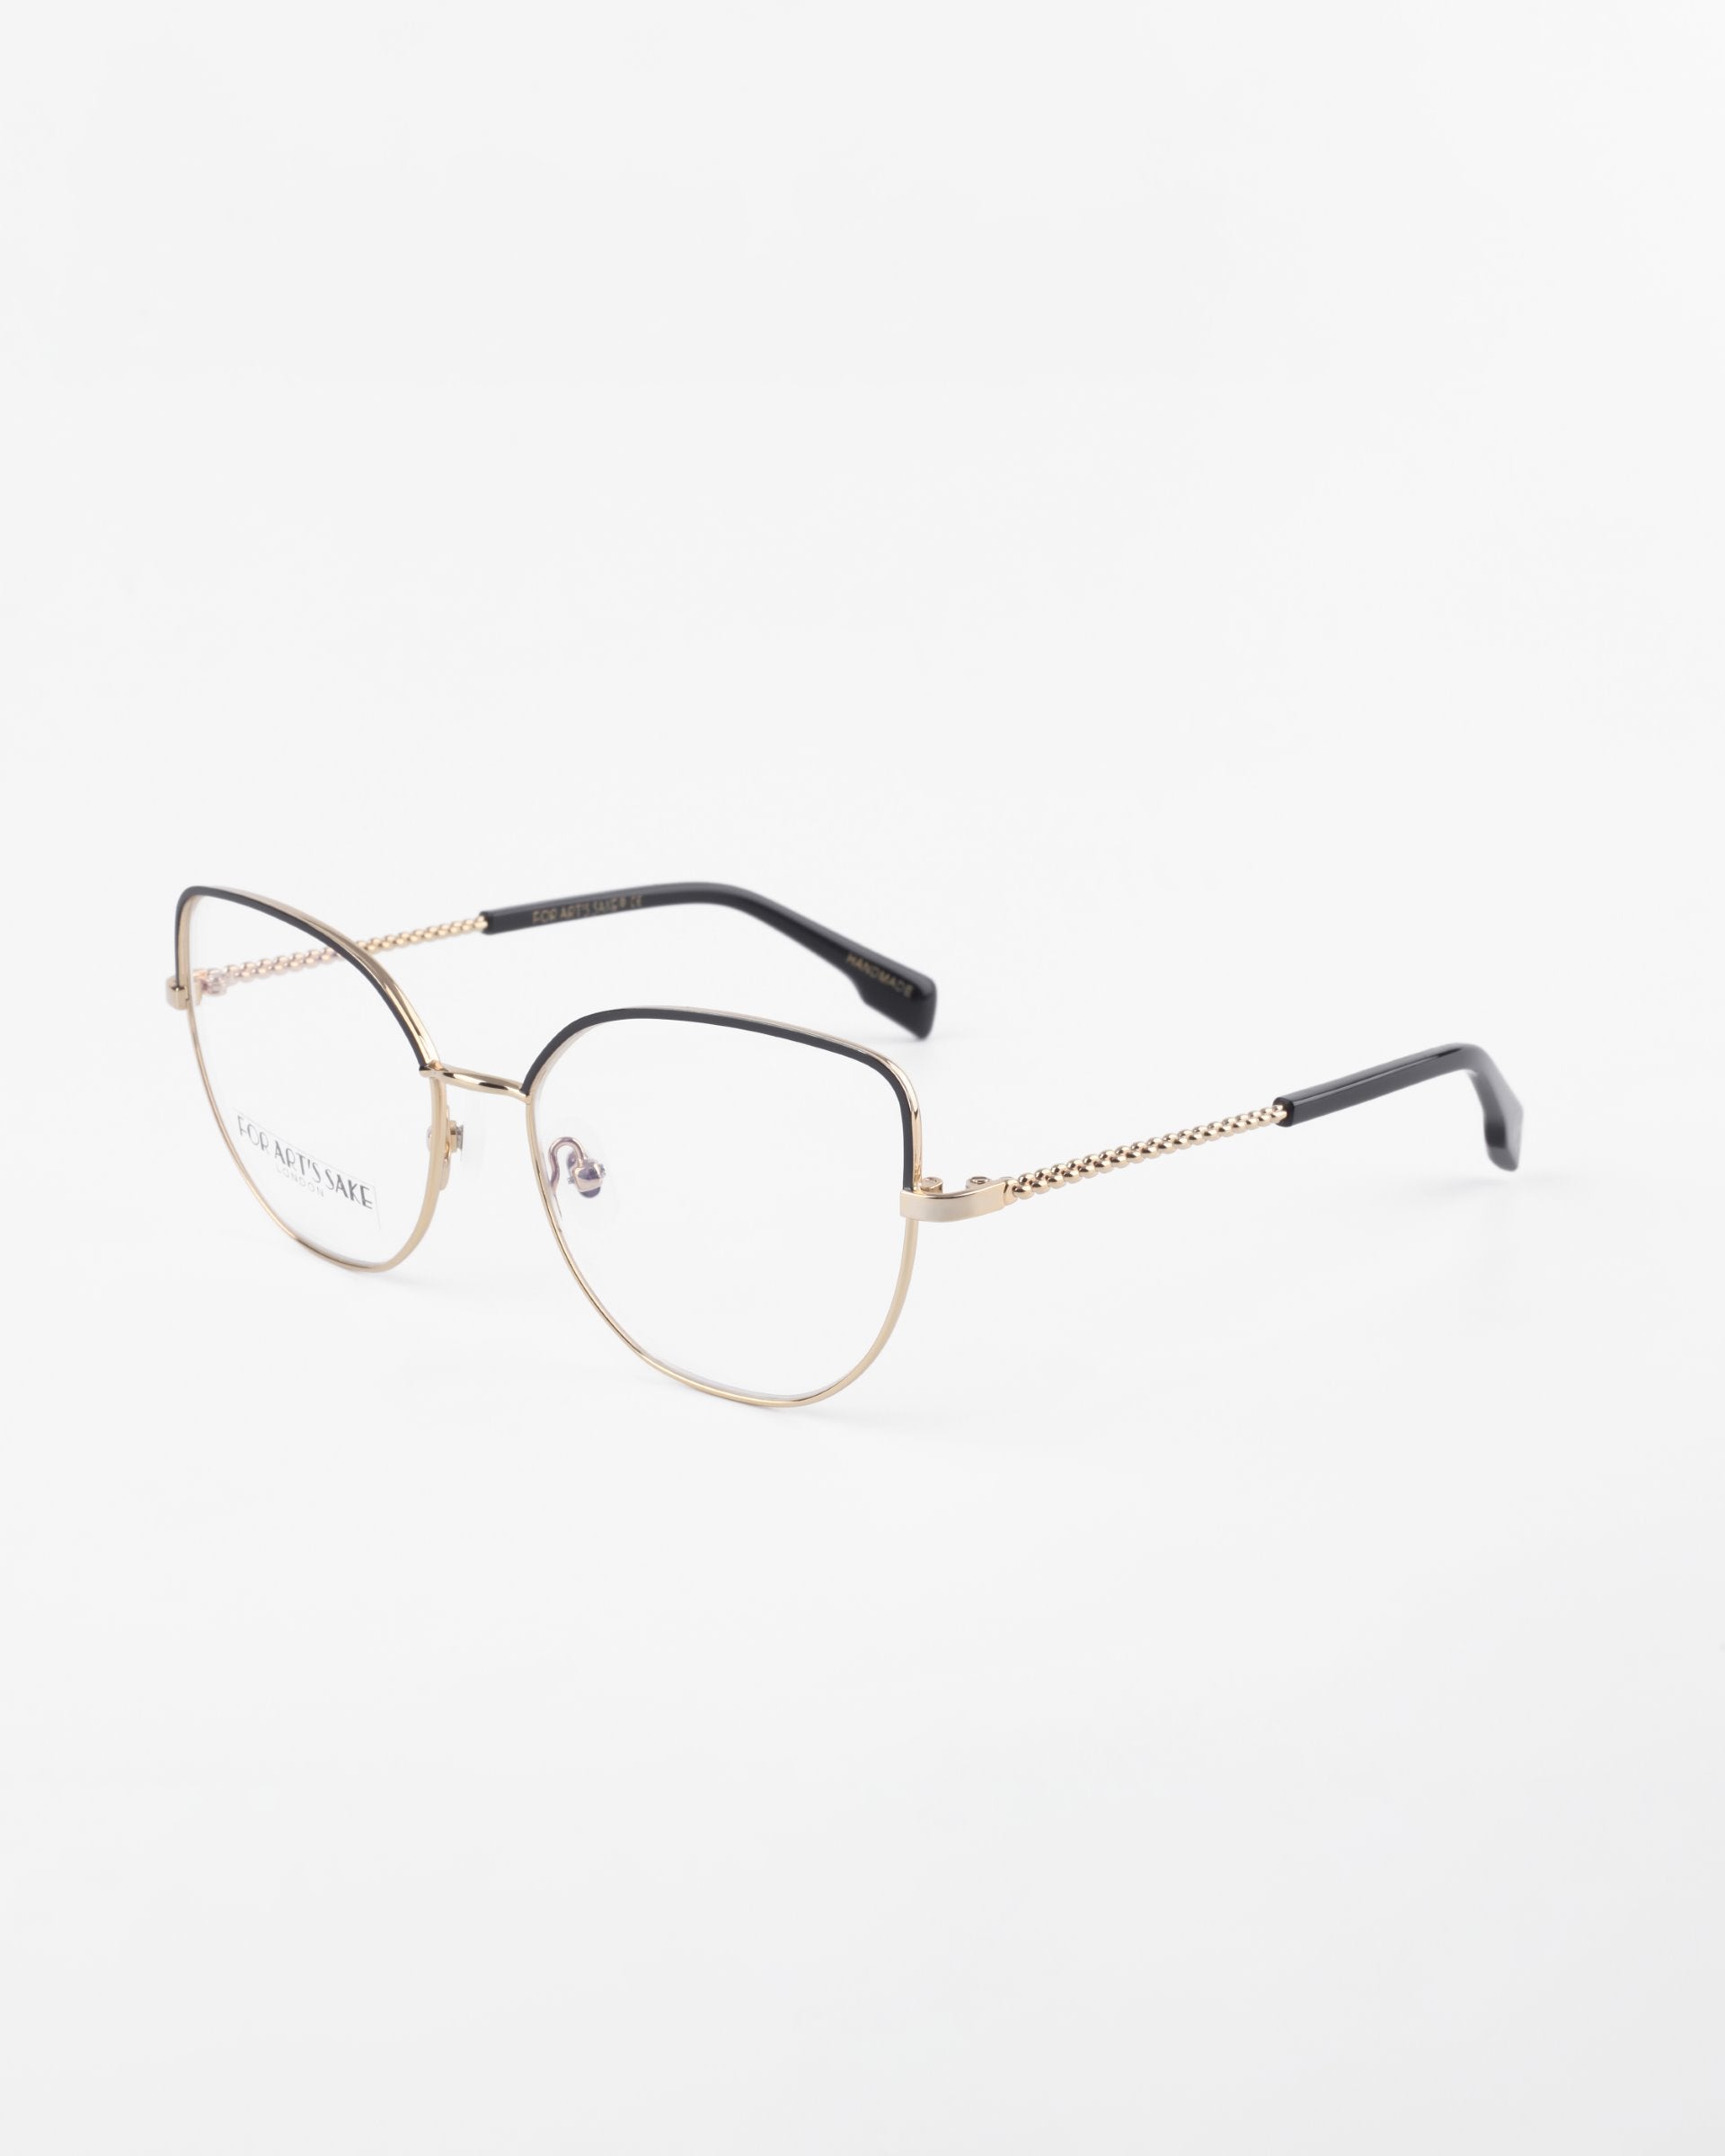 A pair of Ophelia by For Art&#39;s Sake® eyeglasses with a gold-colored frame and black earpieces. The frame features a subtle chain-like design on the temples, and the clear lenses come with a blue light filter. The glasses are set against a plain white background.